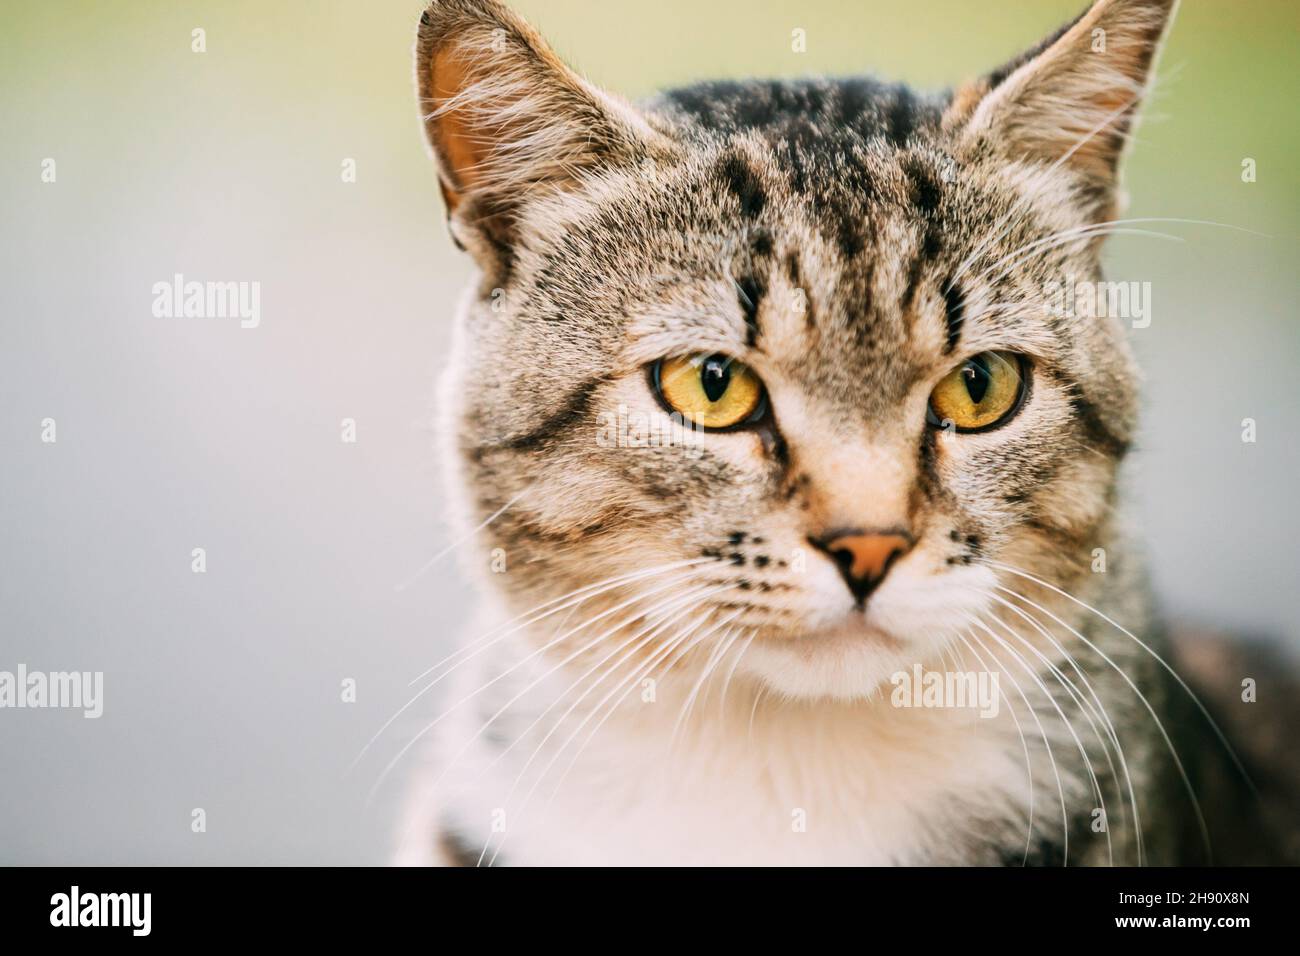 Portrait Of Gray And White Mixed Breed Cat. Stock Photo